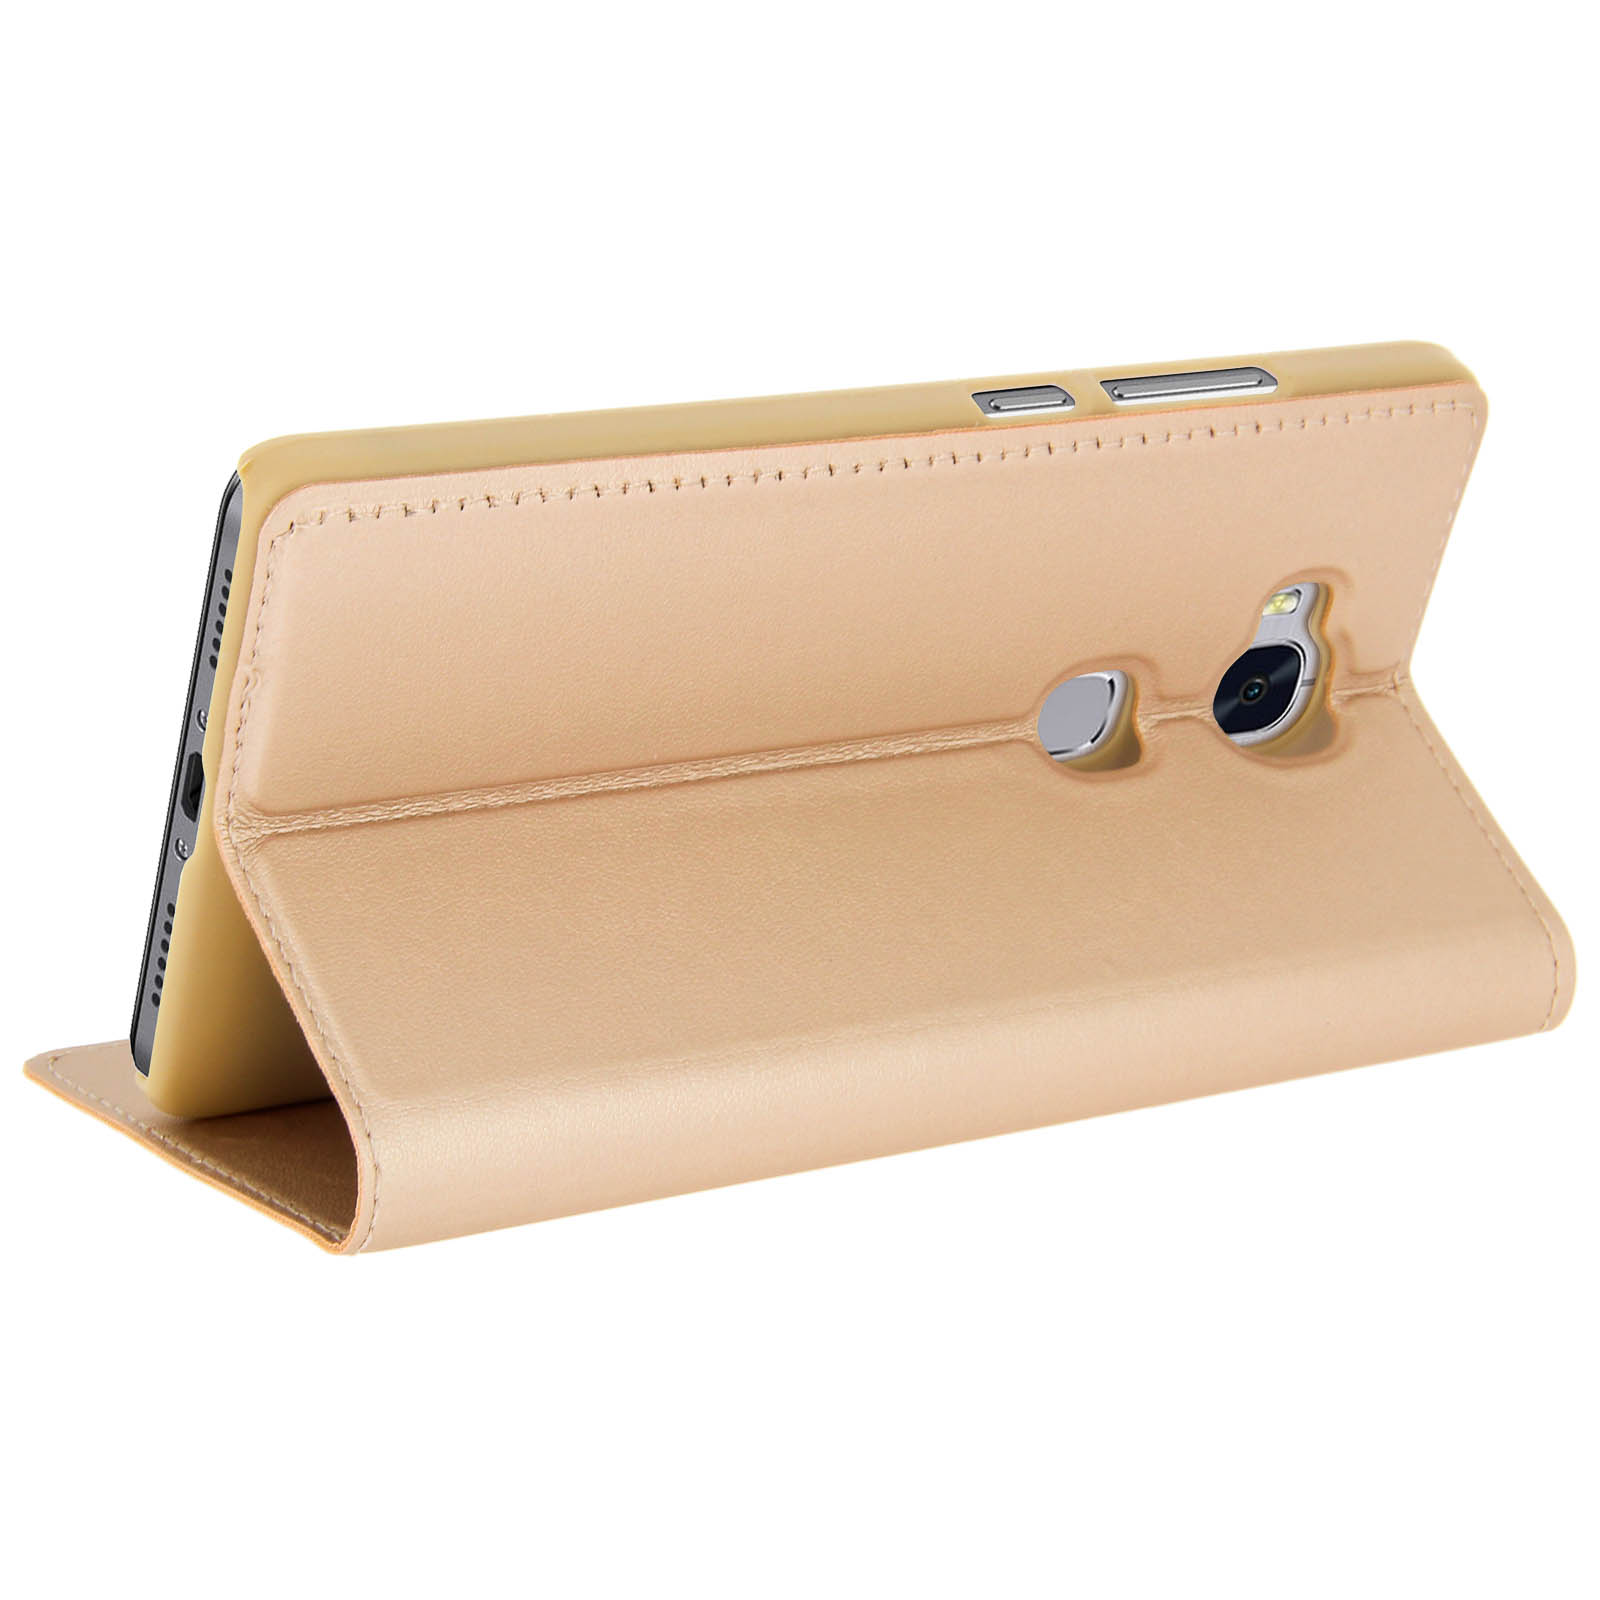 Gold View 5X, Honor Series, Honor, CLAPPIO Bookcover, Cover